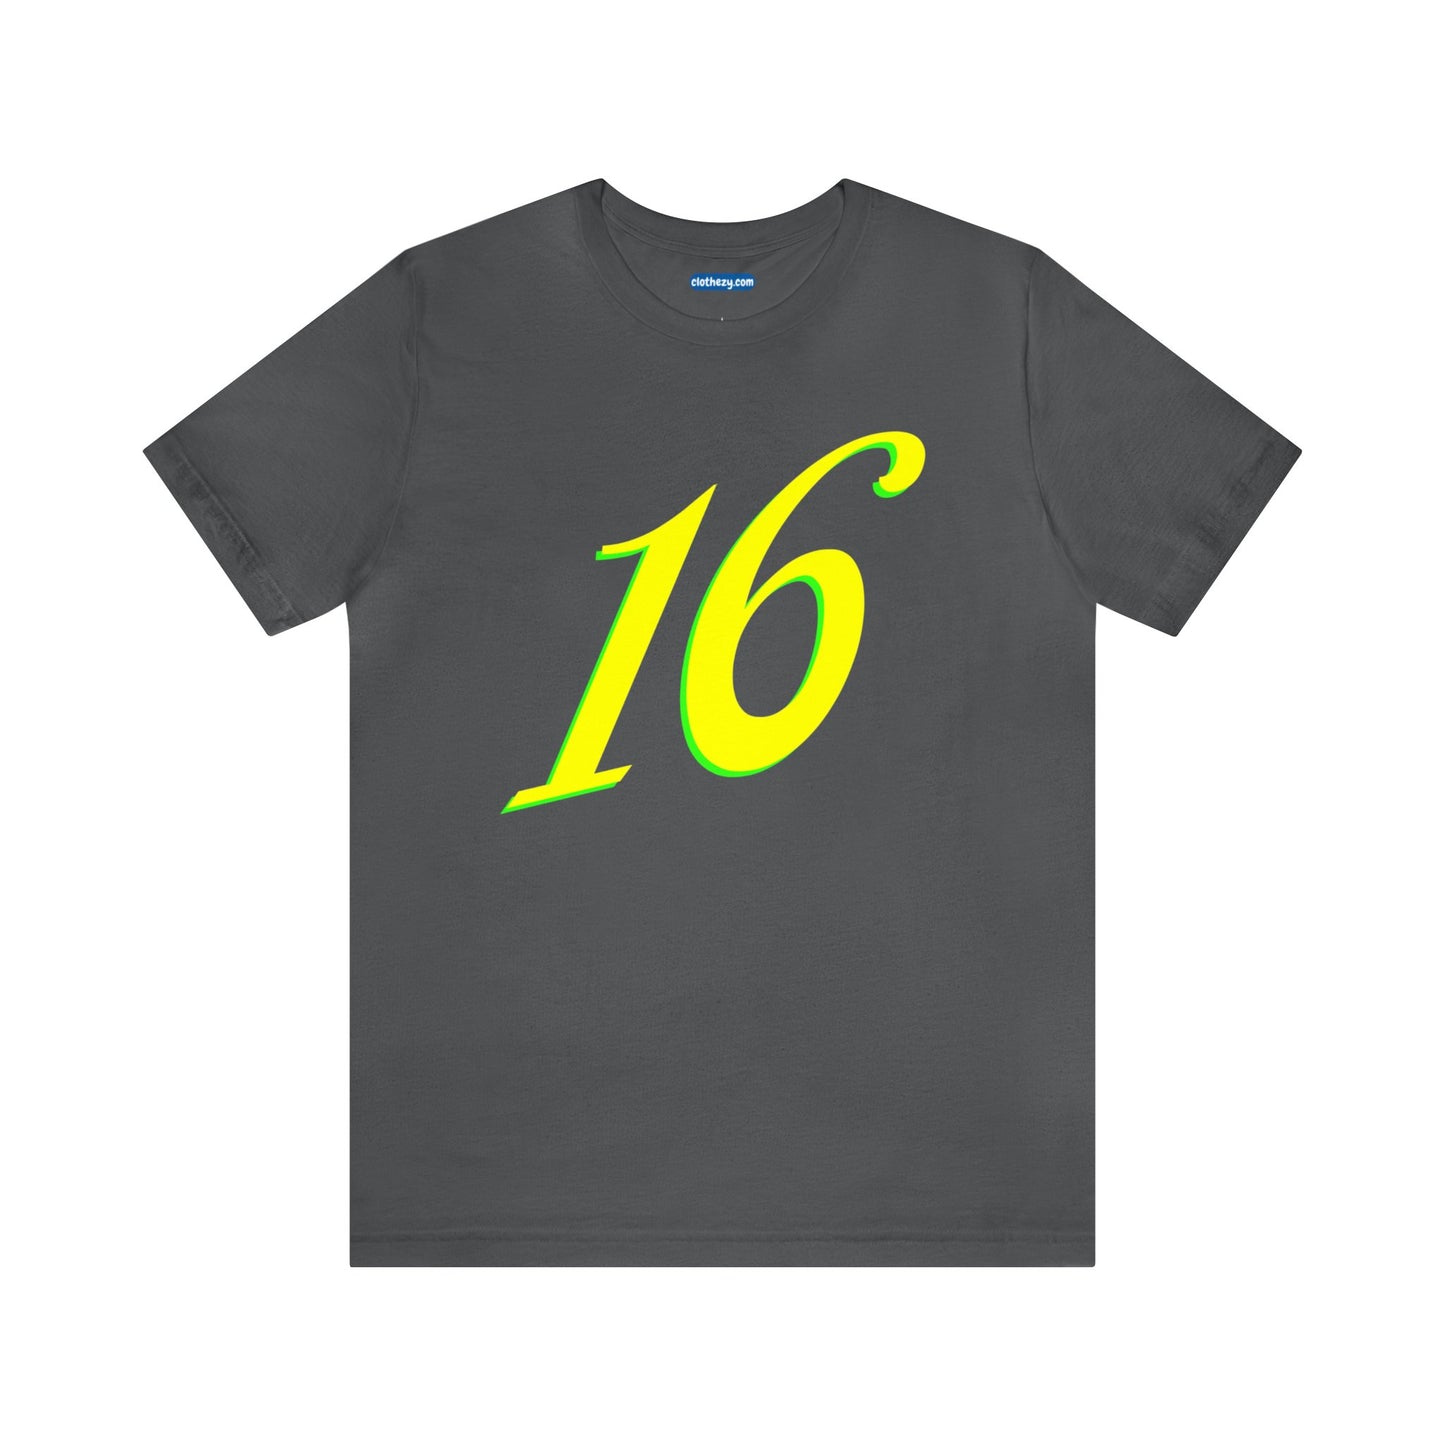 Number 16 Design - Soft Cotton Tee for birthdays and celebrations, Gift for friends and family, Multiple Options by clothezy.com in Black Size Small - Buy Now